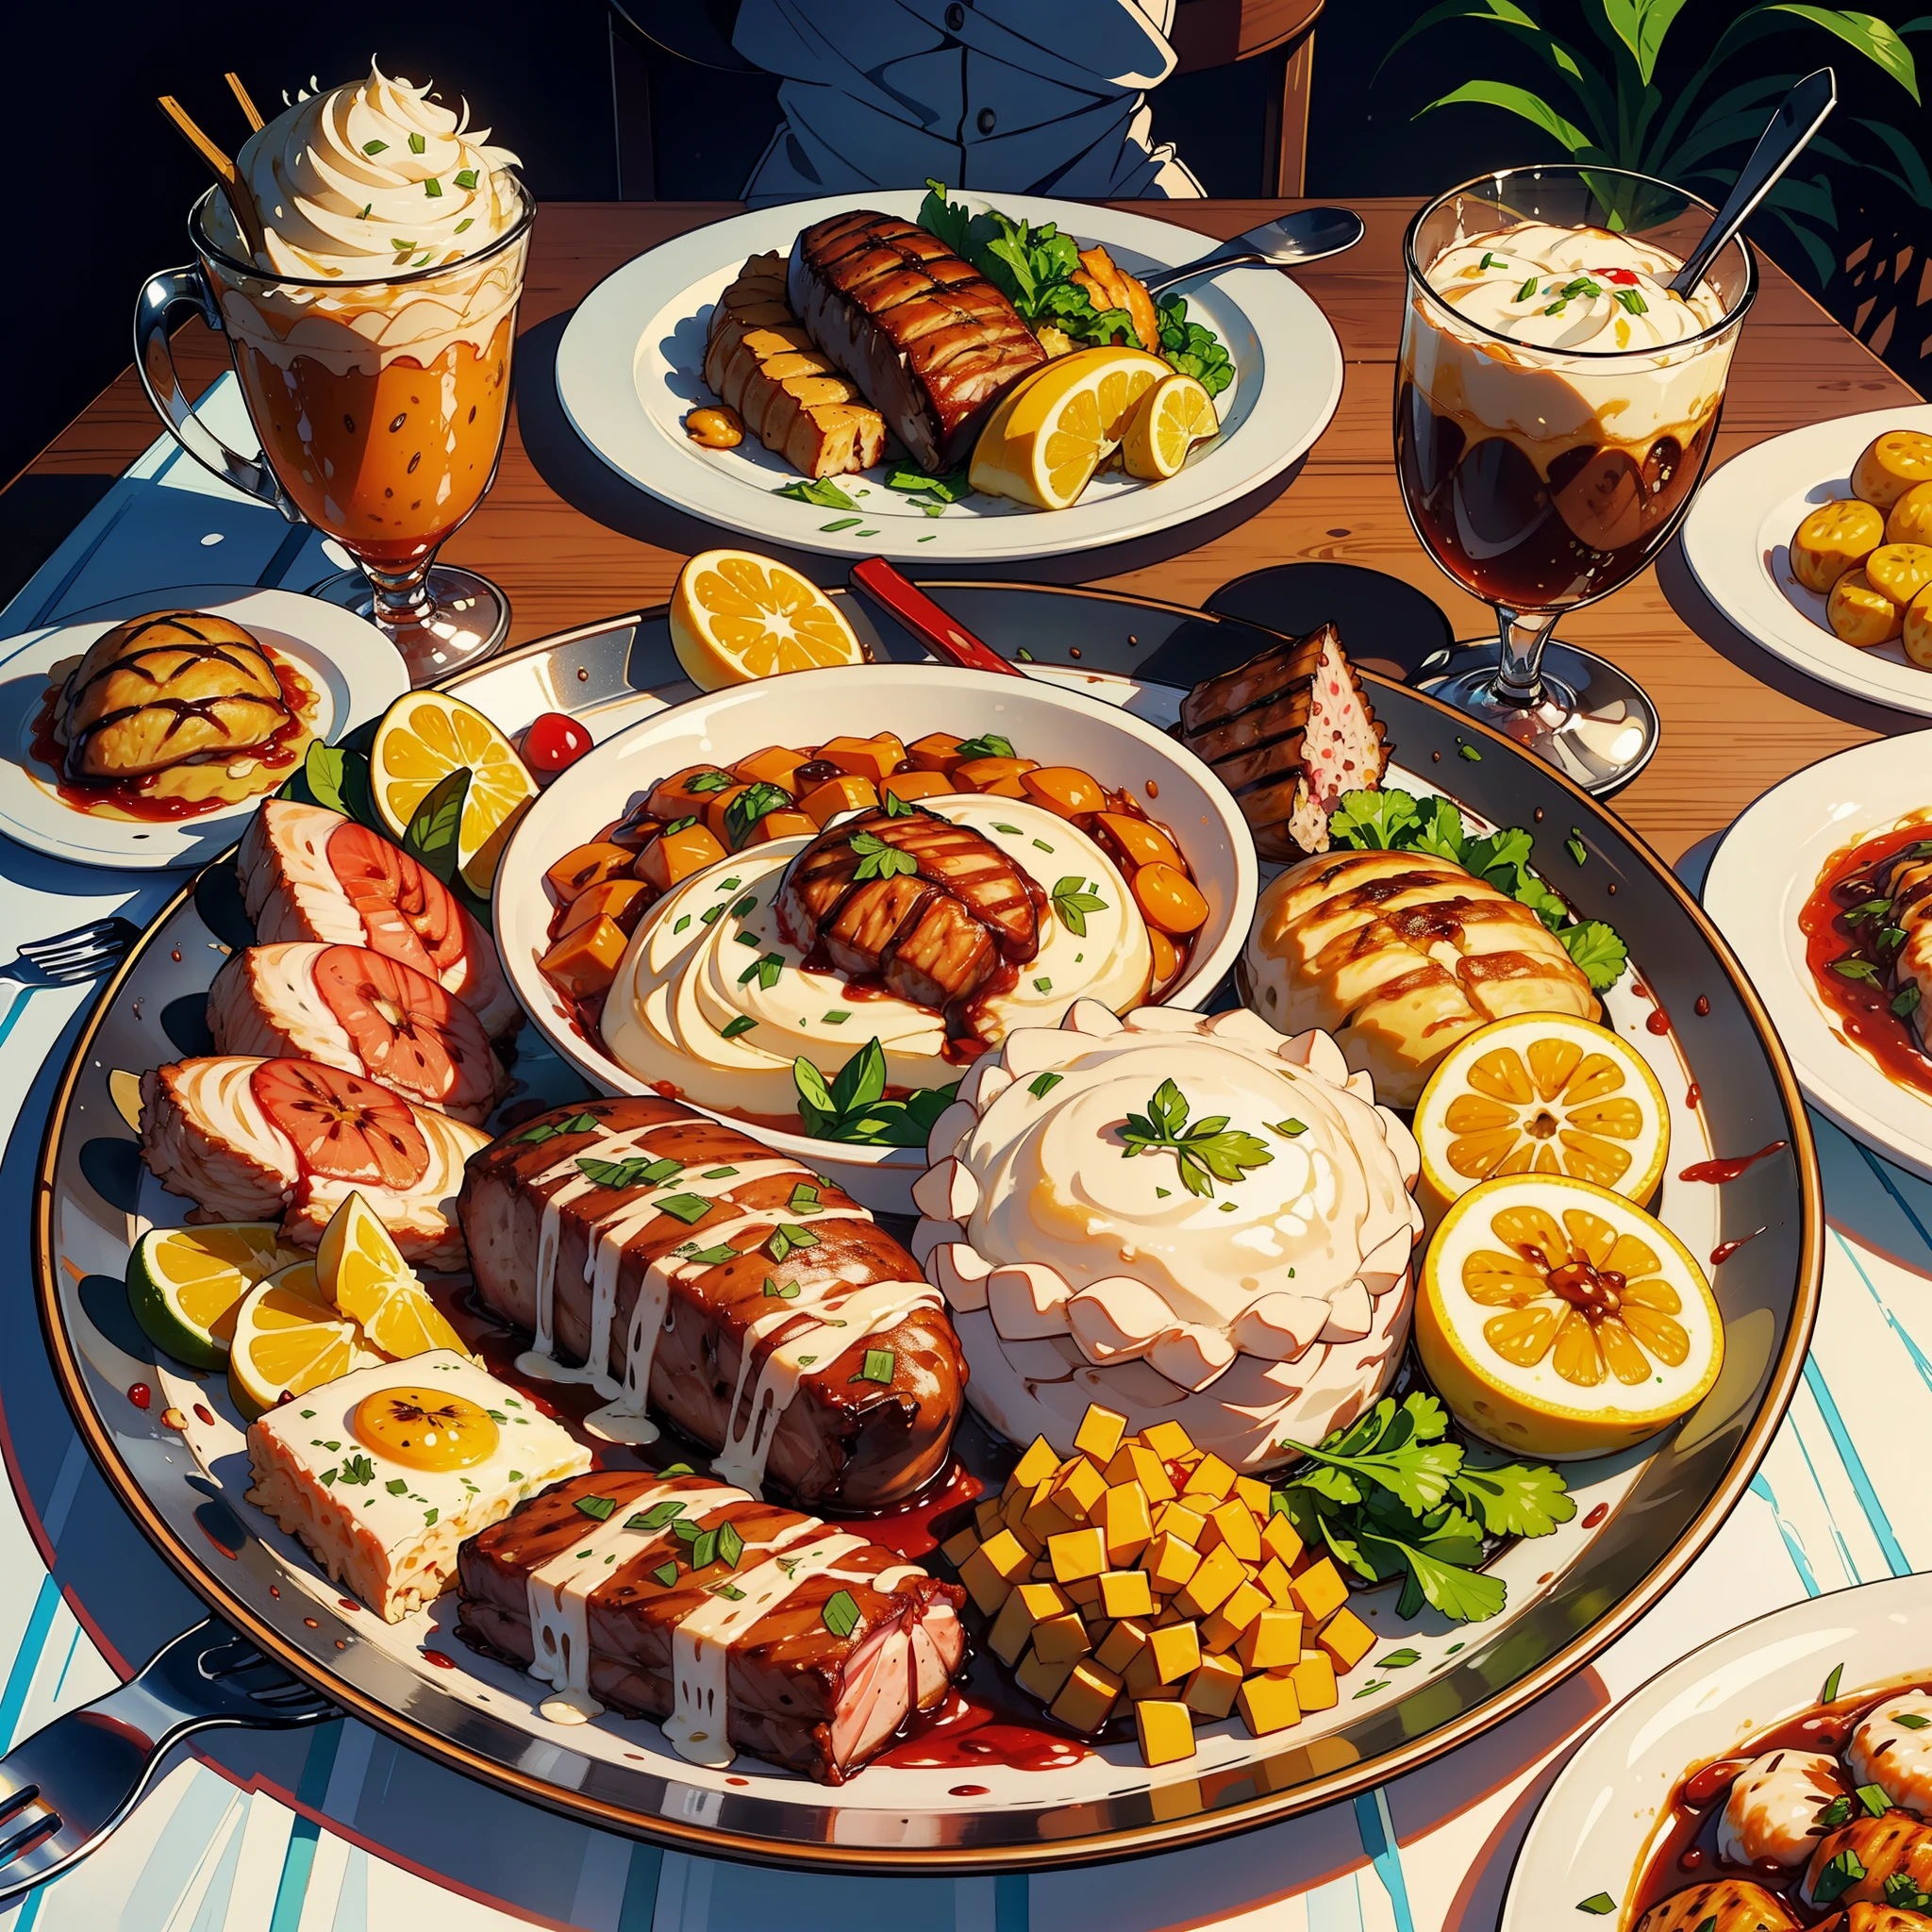 Create several extremely realistic dishes, Cupcakes, feijoada, Paste, Grilled fish, BBQ, Lasagna, Pasta, pancake, Parmesan Steak, passion fruit moss, chicken salad dressing, I don&#39;t want it to look more real.